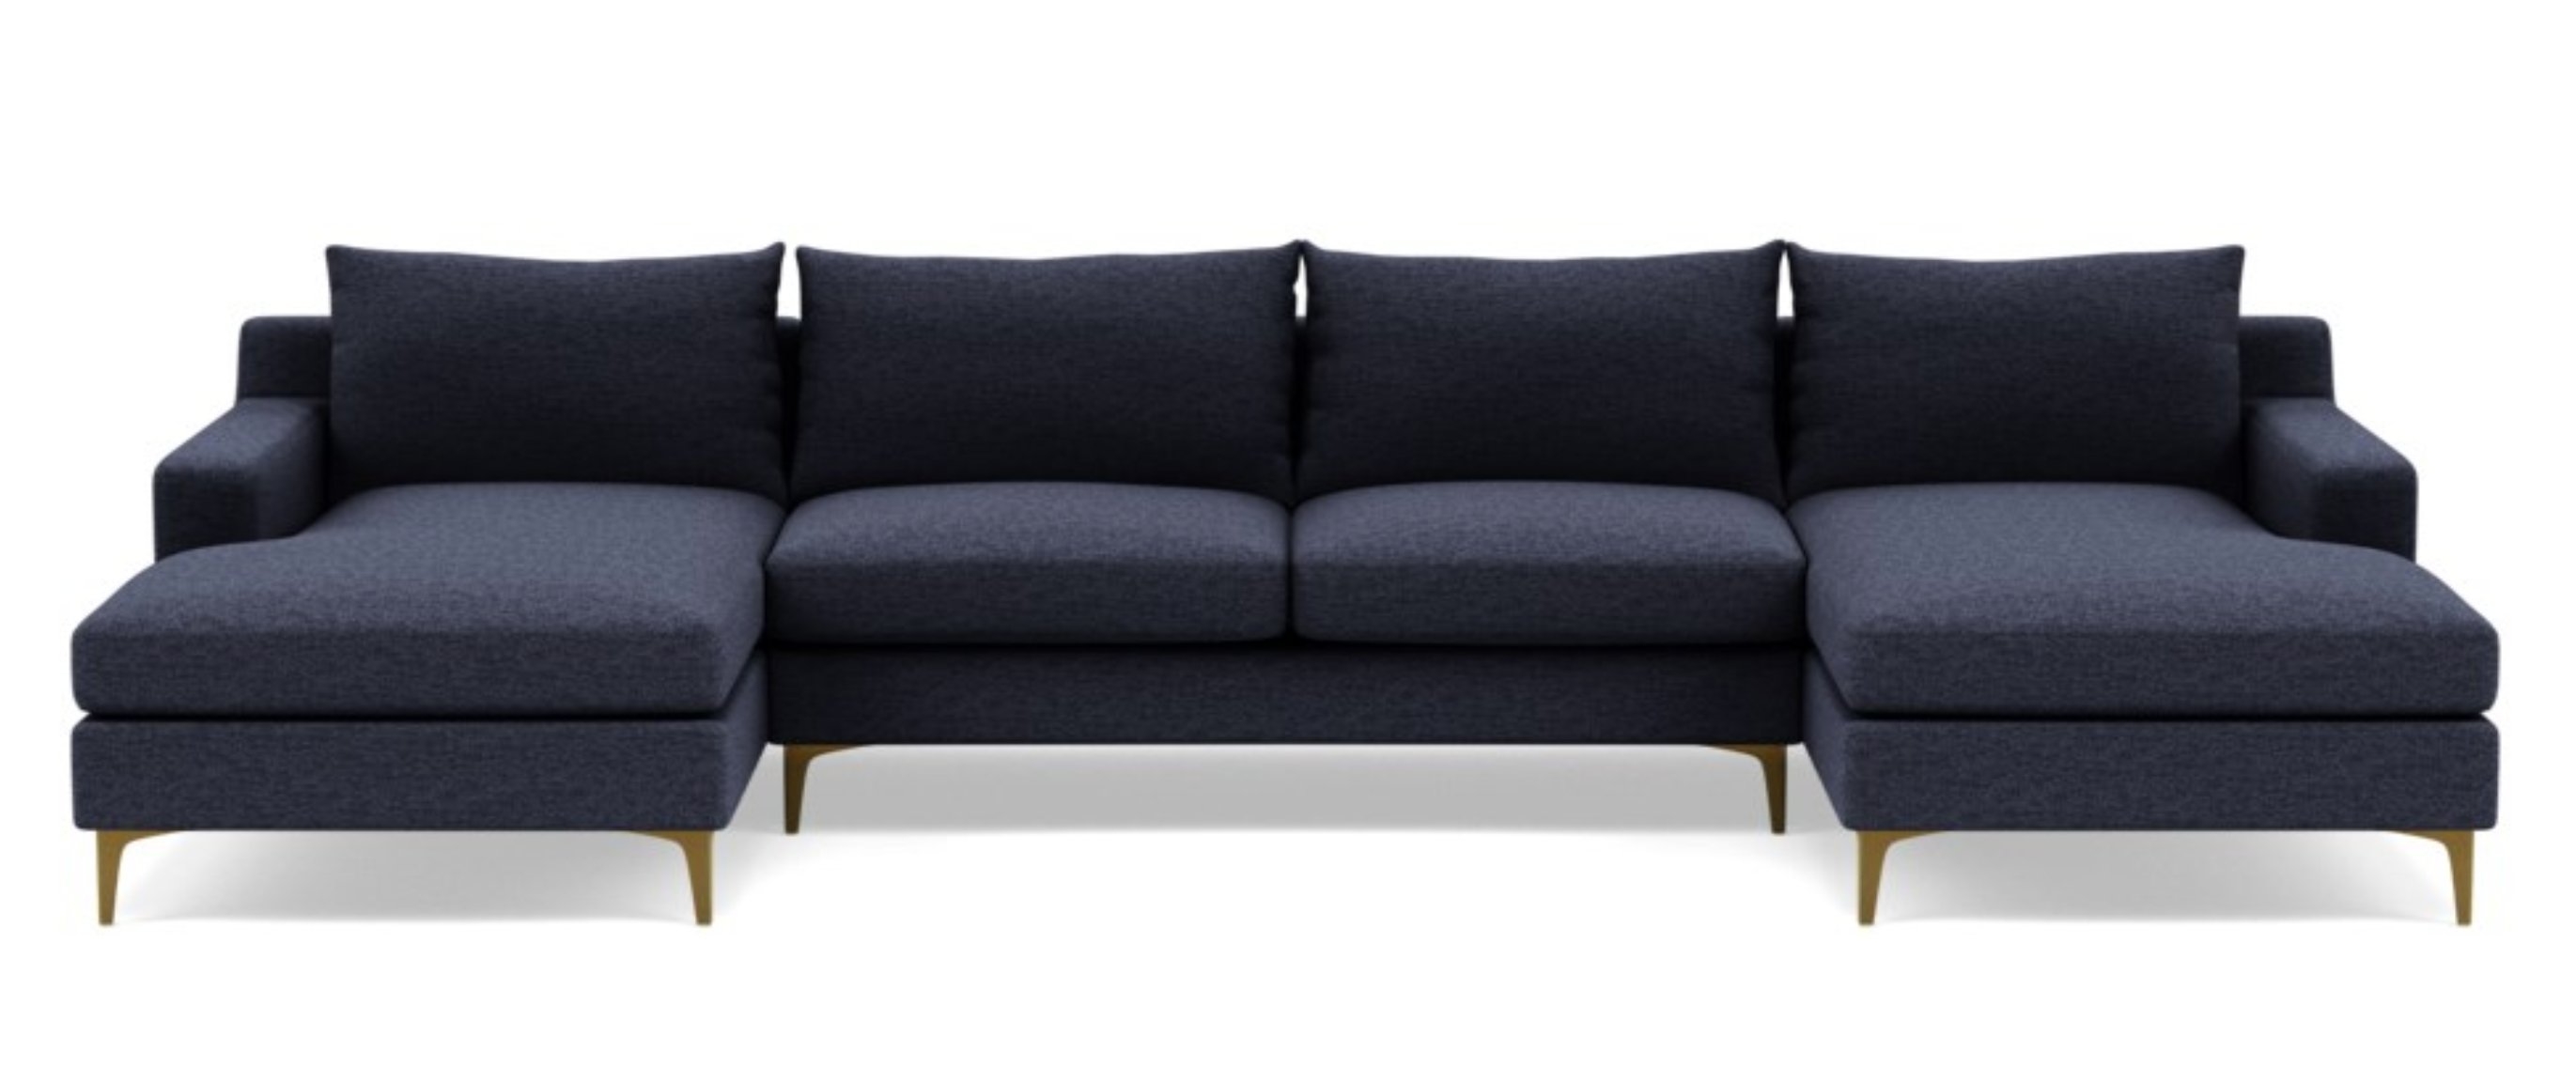 SLOAN U-Sectional Sofa in Azure Heathered Weave with Brass Plated Sloan L Leg - Image 0